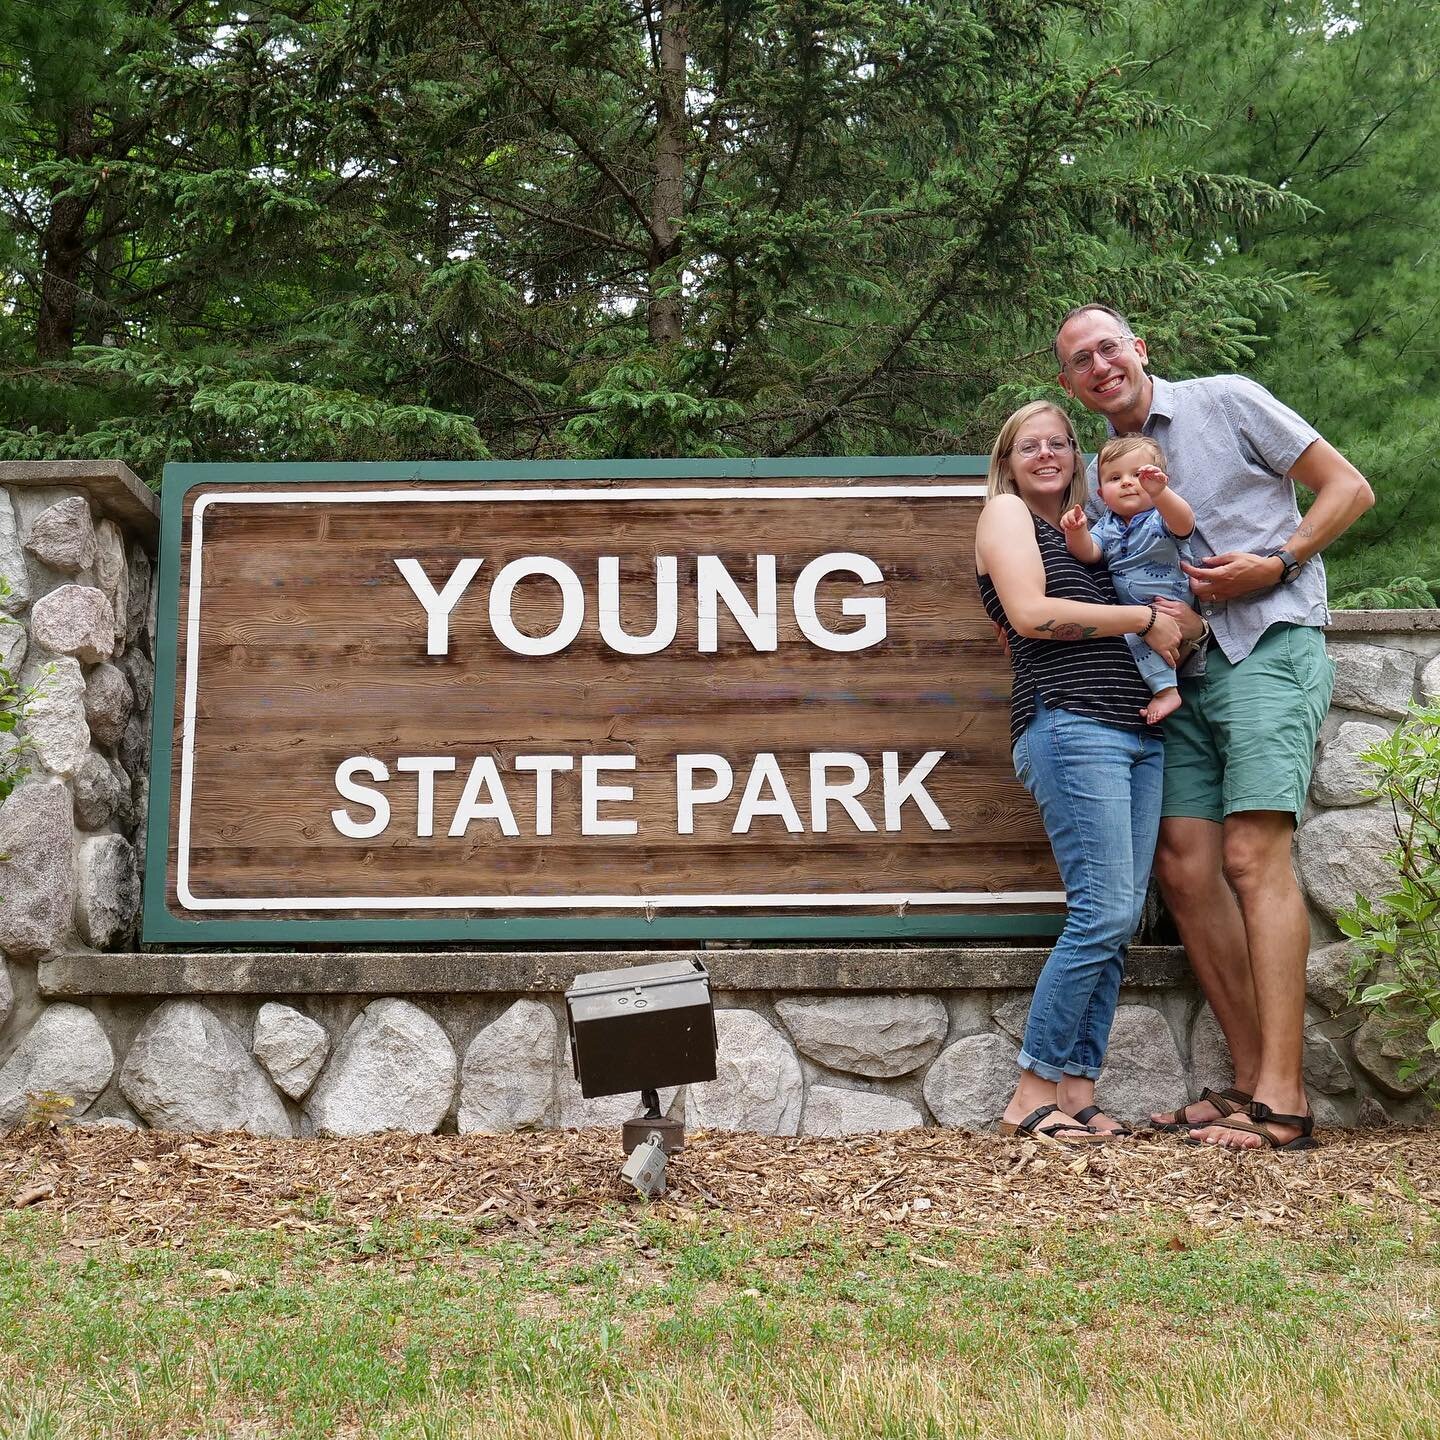 Young State Park is the 7th Michigan state park we&rsquo;ve visited as a family of three. We enjoyed the proximity to Boyne and Charlevoix and how the park has access to great hiking trails and a beautiful beach. Definitely recommend.

Jim ran his fi